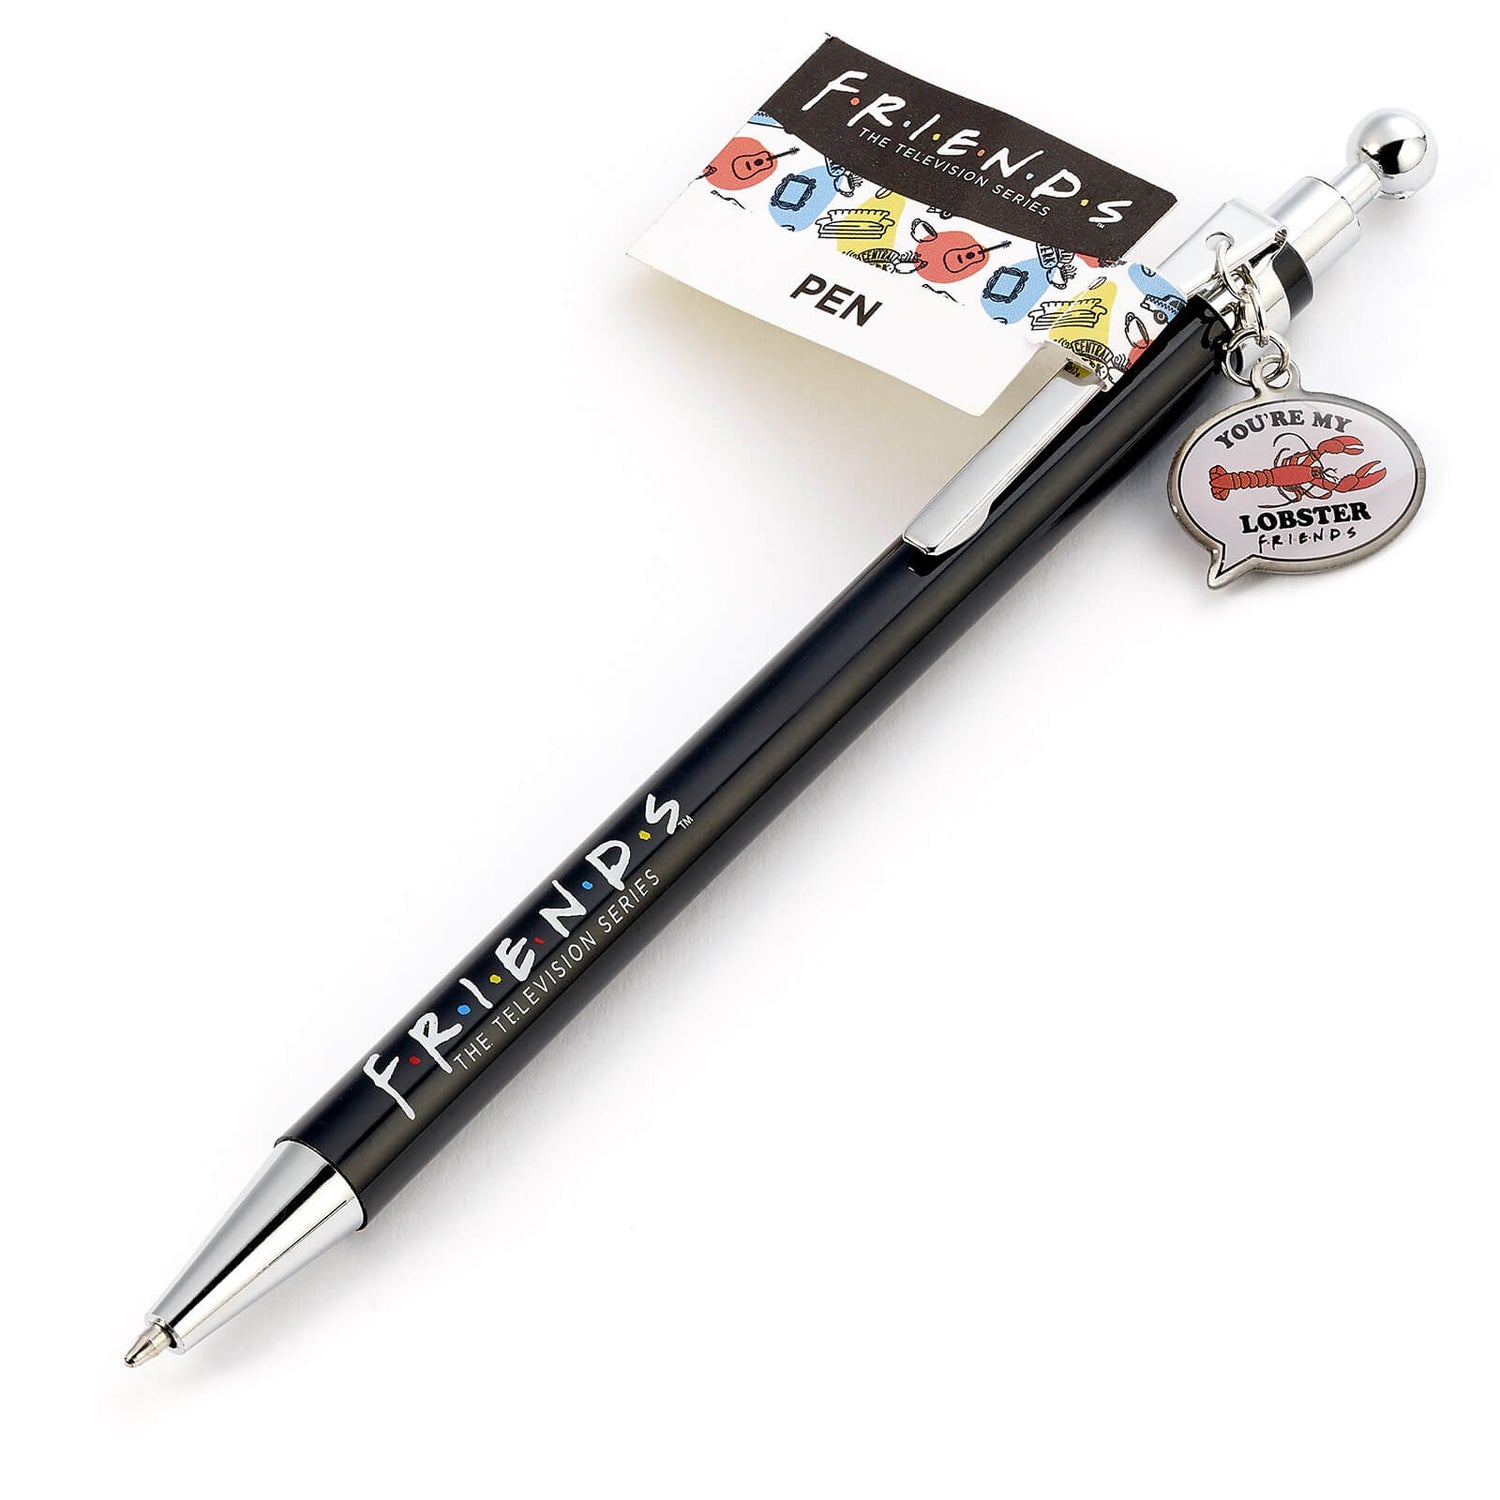 FRIENDS TV Show You're my Lobster Charm Pen